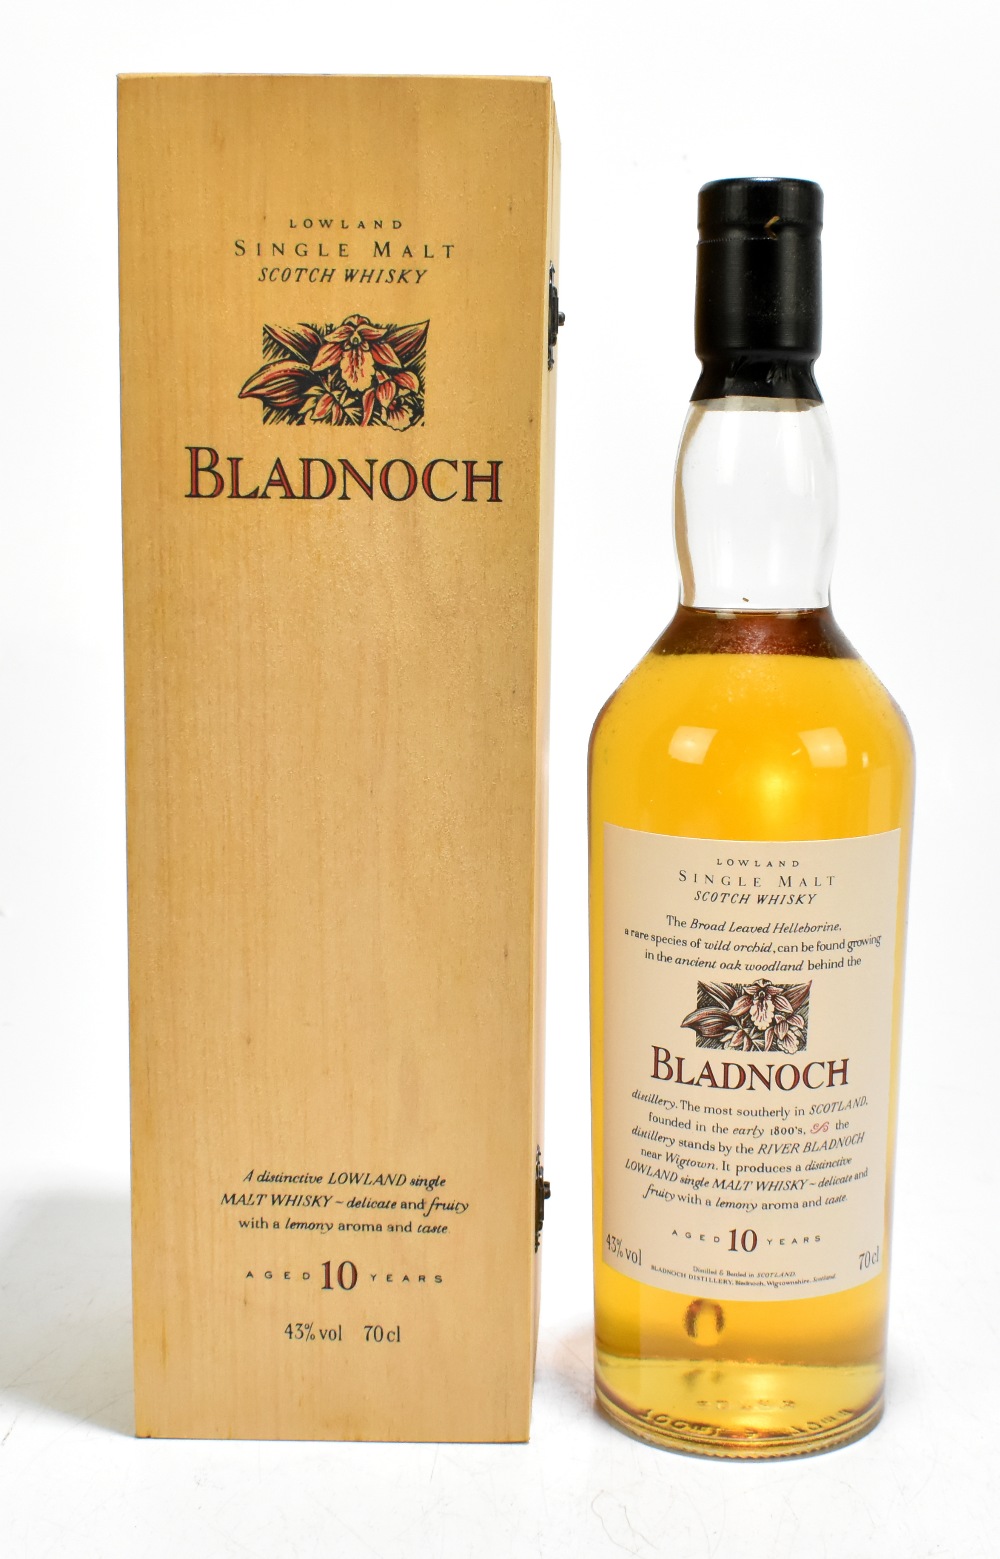 WHISKY; a single bottle of Bladnoch Single Malt Scotch Whisky, aged 10 years, 70cl, 43%, fitted in